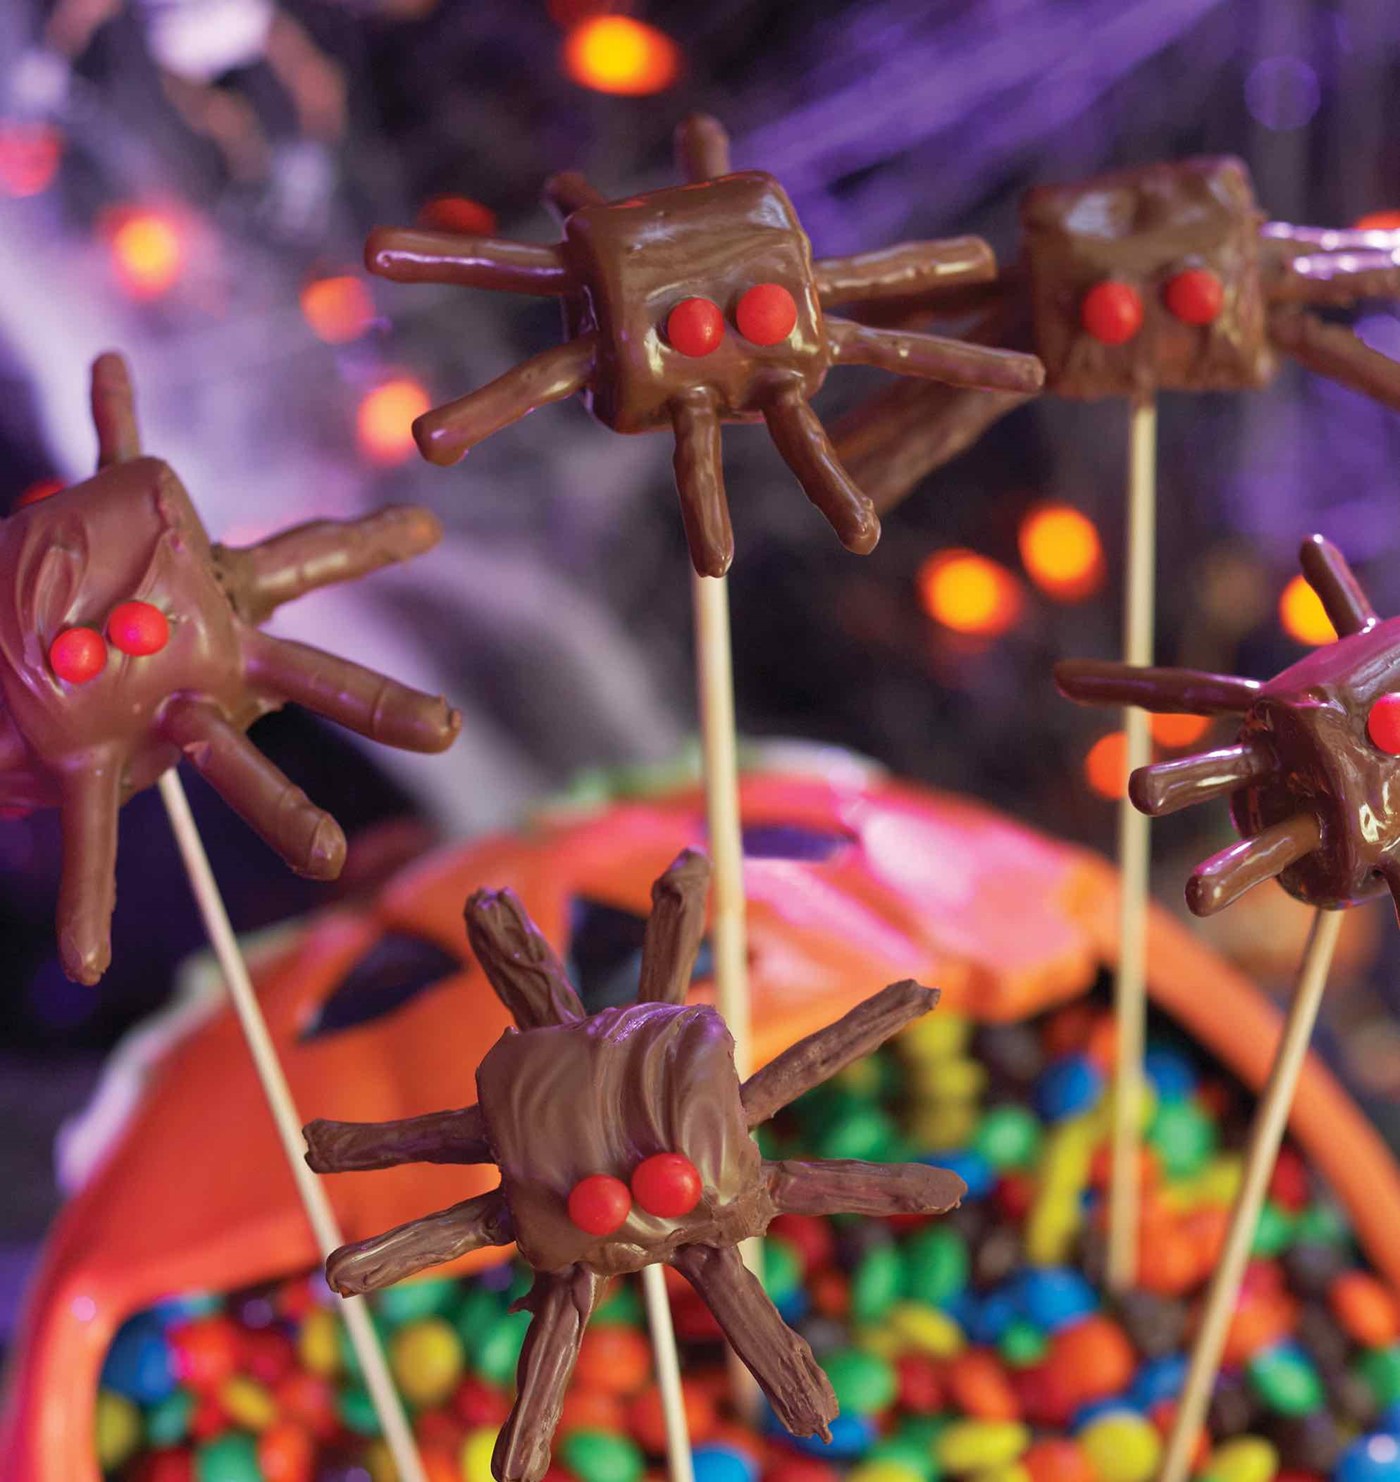 Chocolate Covered Marshmallows and Stick Pretzels Make a Spider